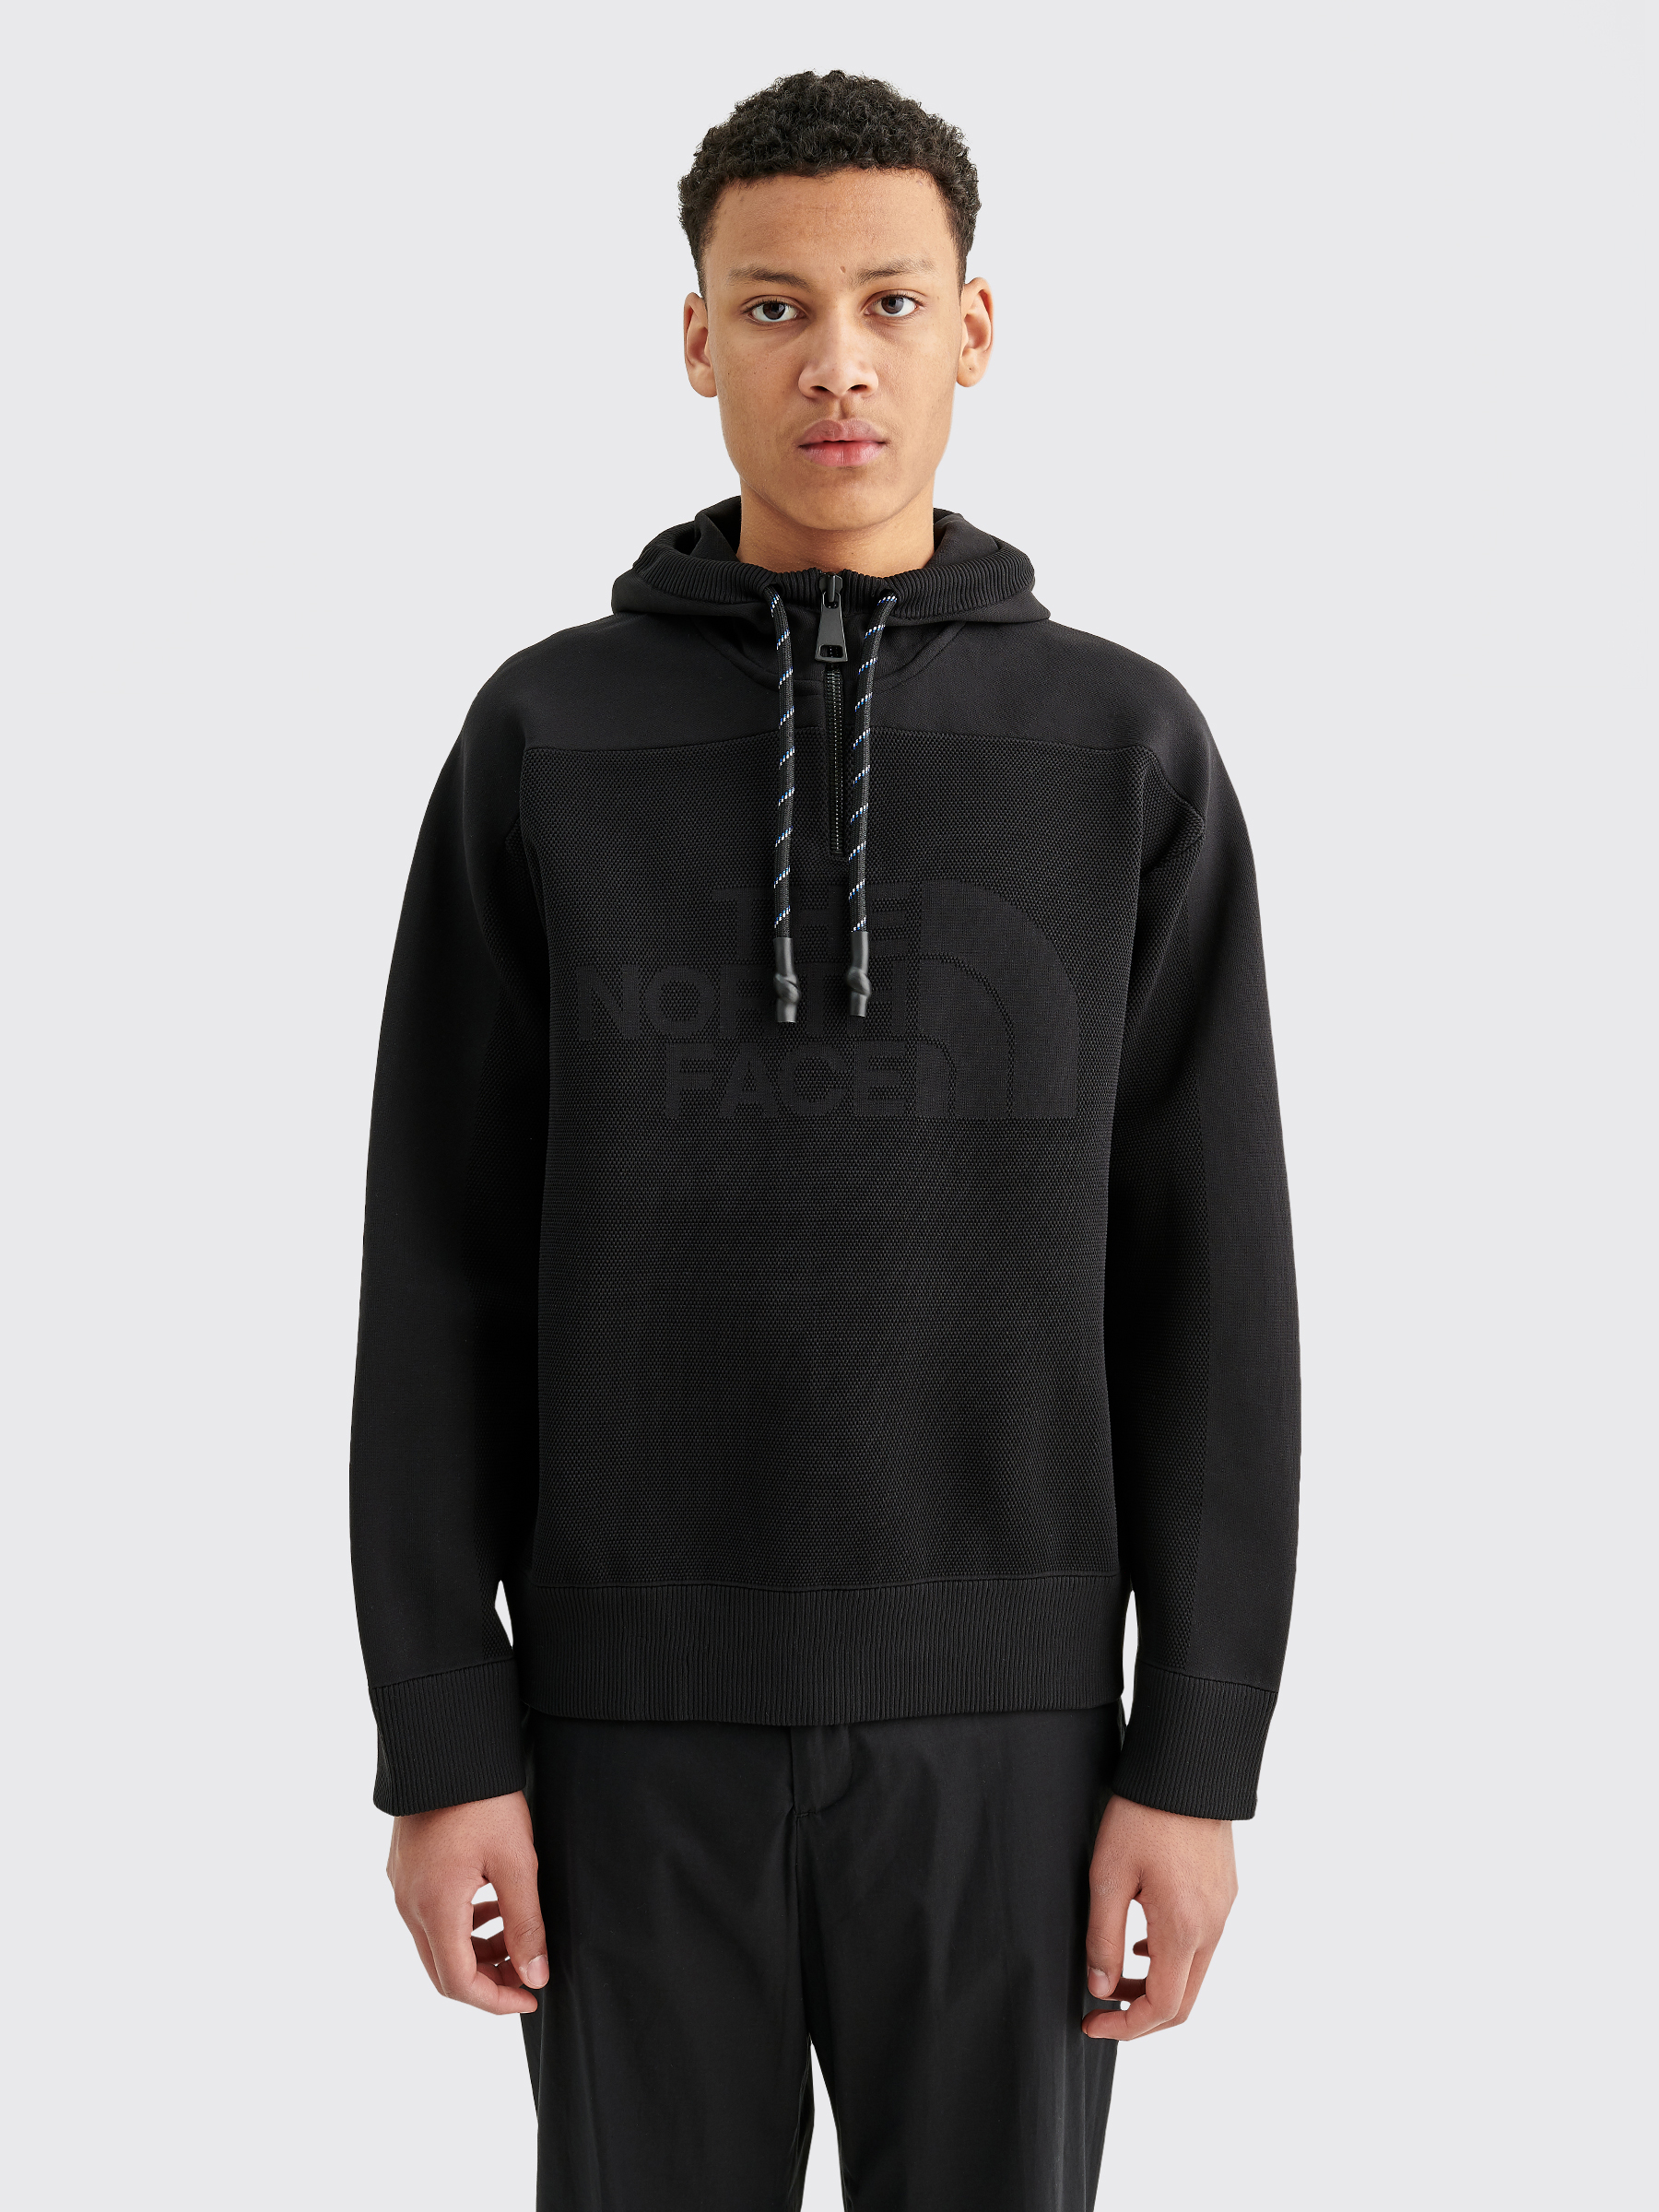 north face hooded sweater